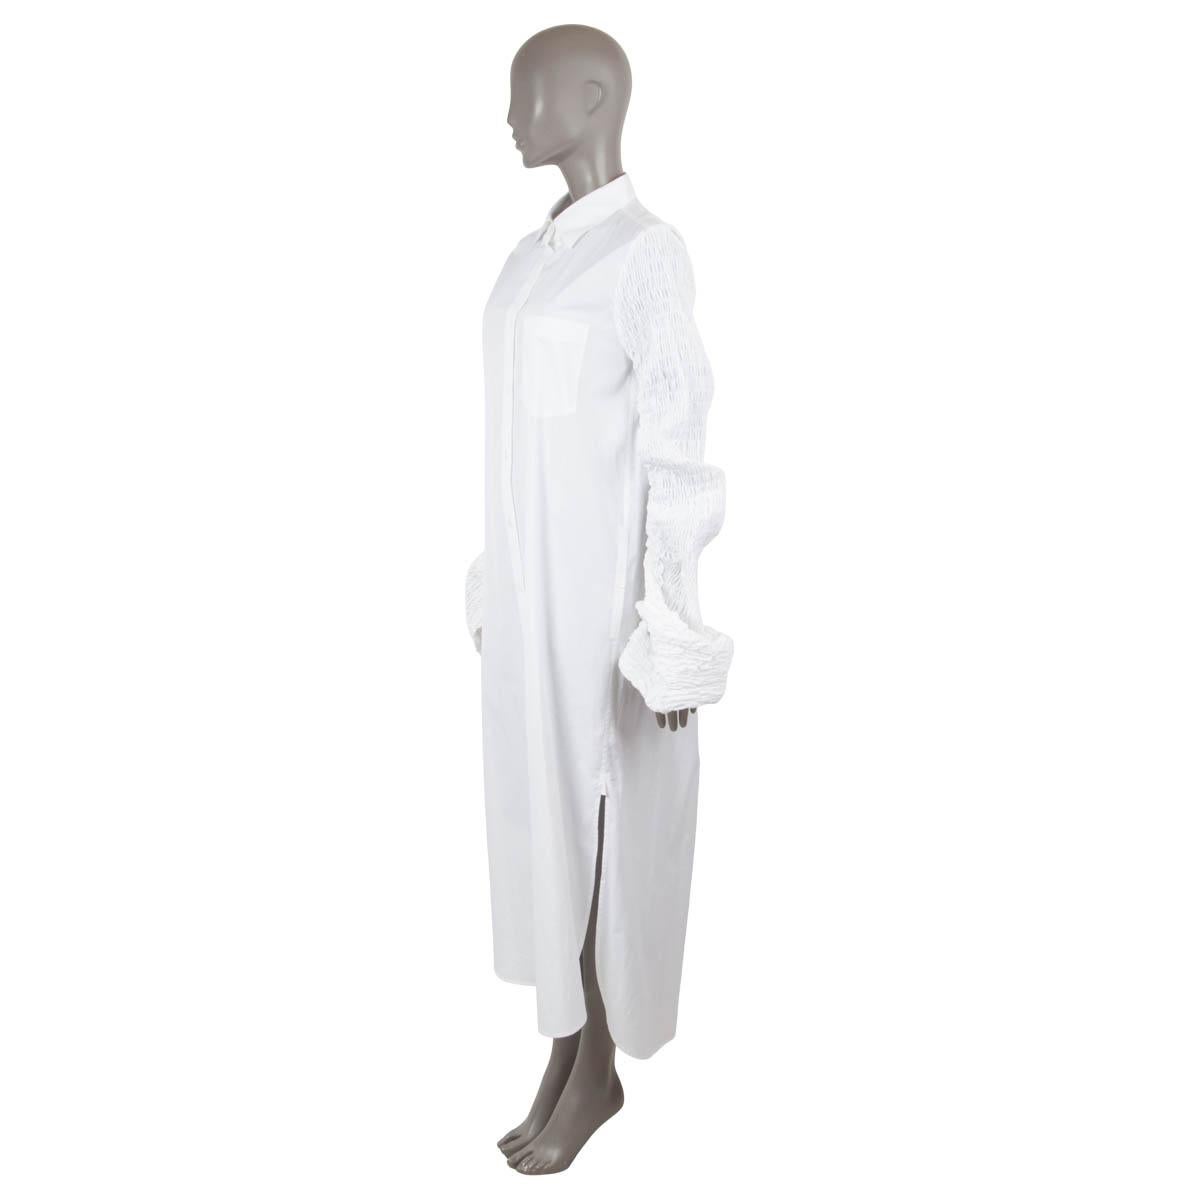 100% authentic Dries Van Noten classic poplin maxi shirtdress with long flared smocked sleeves in white cotton (100%). The design features a point collar, button front closure, a chest patch pocket, back box pleat, buttoned side slits and side split